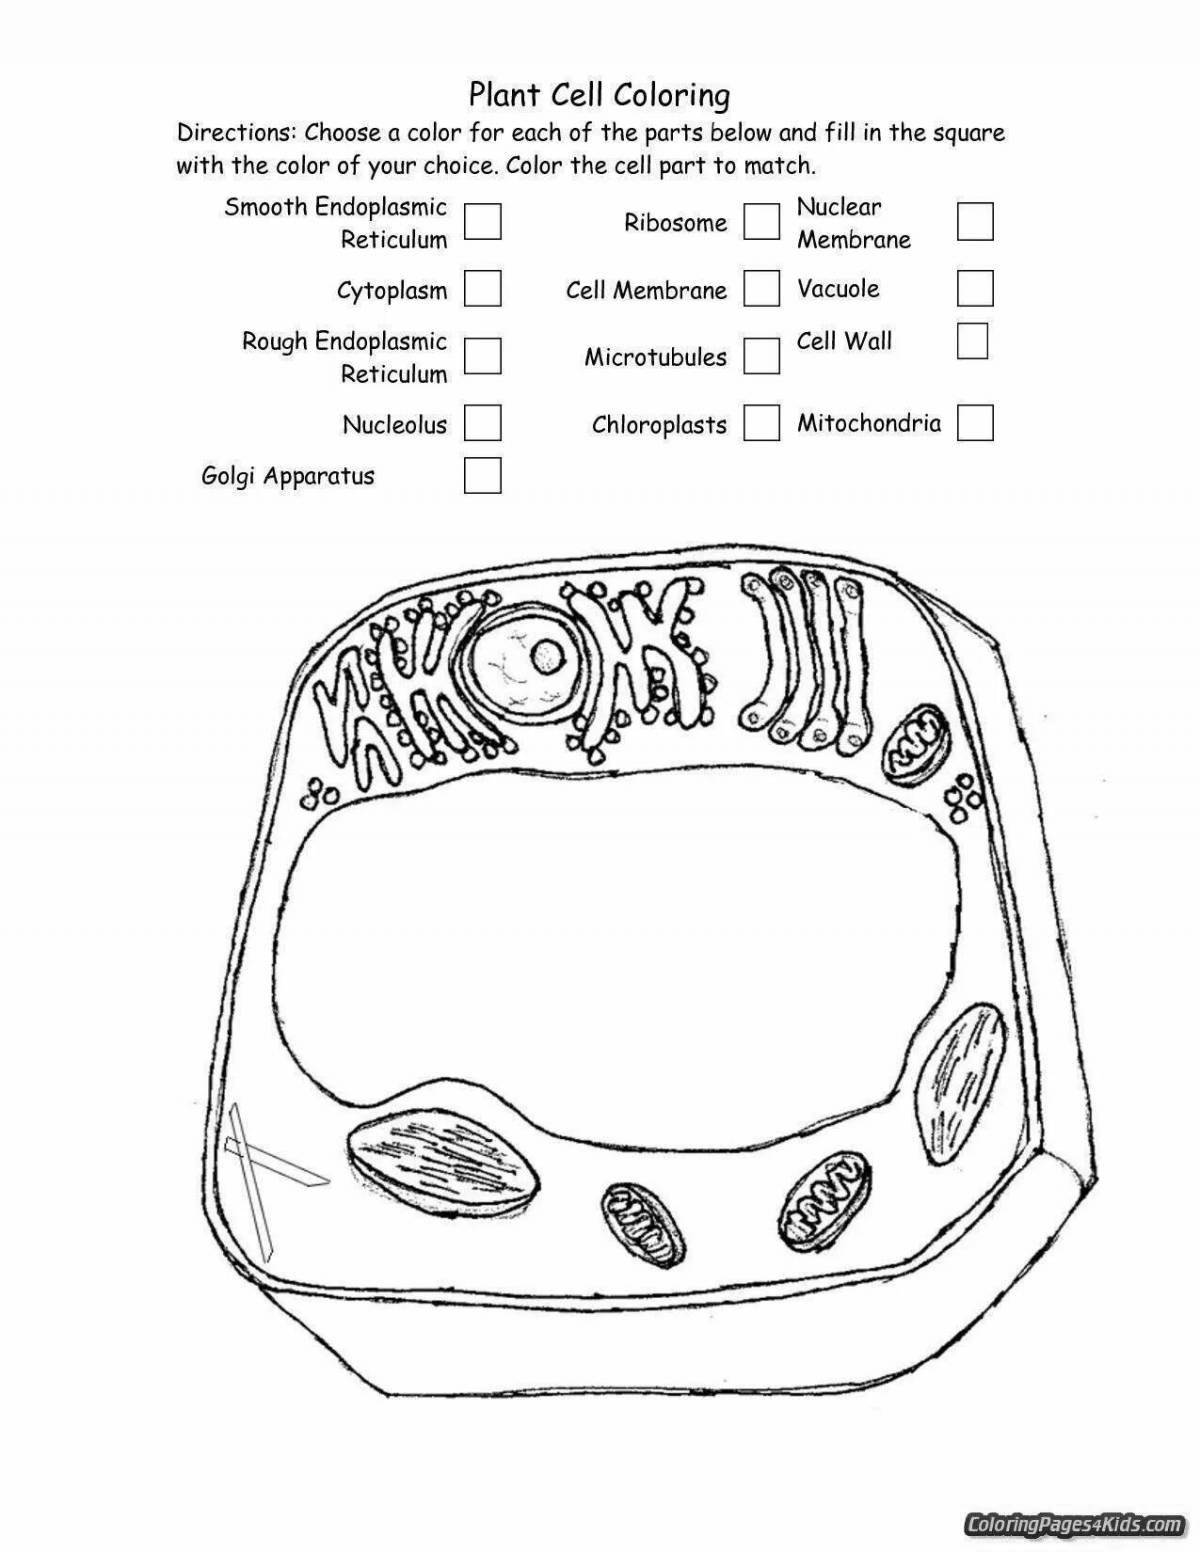 Coloring page of plant cell radiant structure